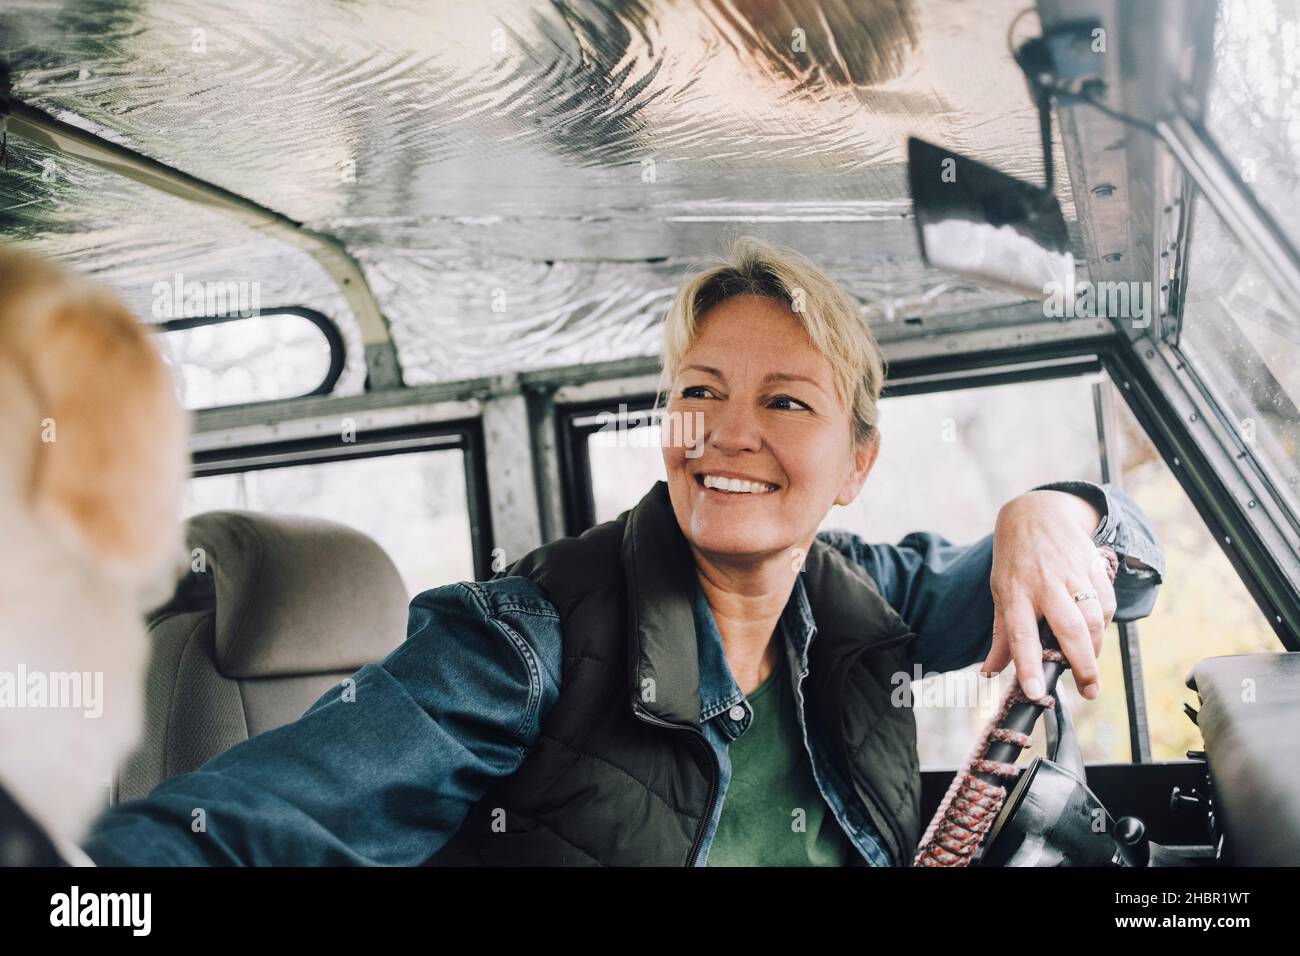 Smiling woman looking away while sitting in sports utility vehicle Stock Photo